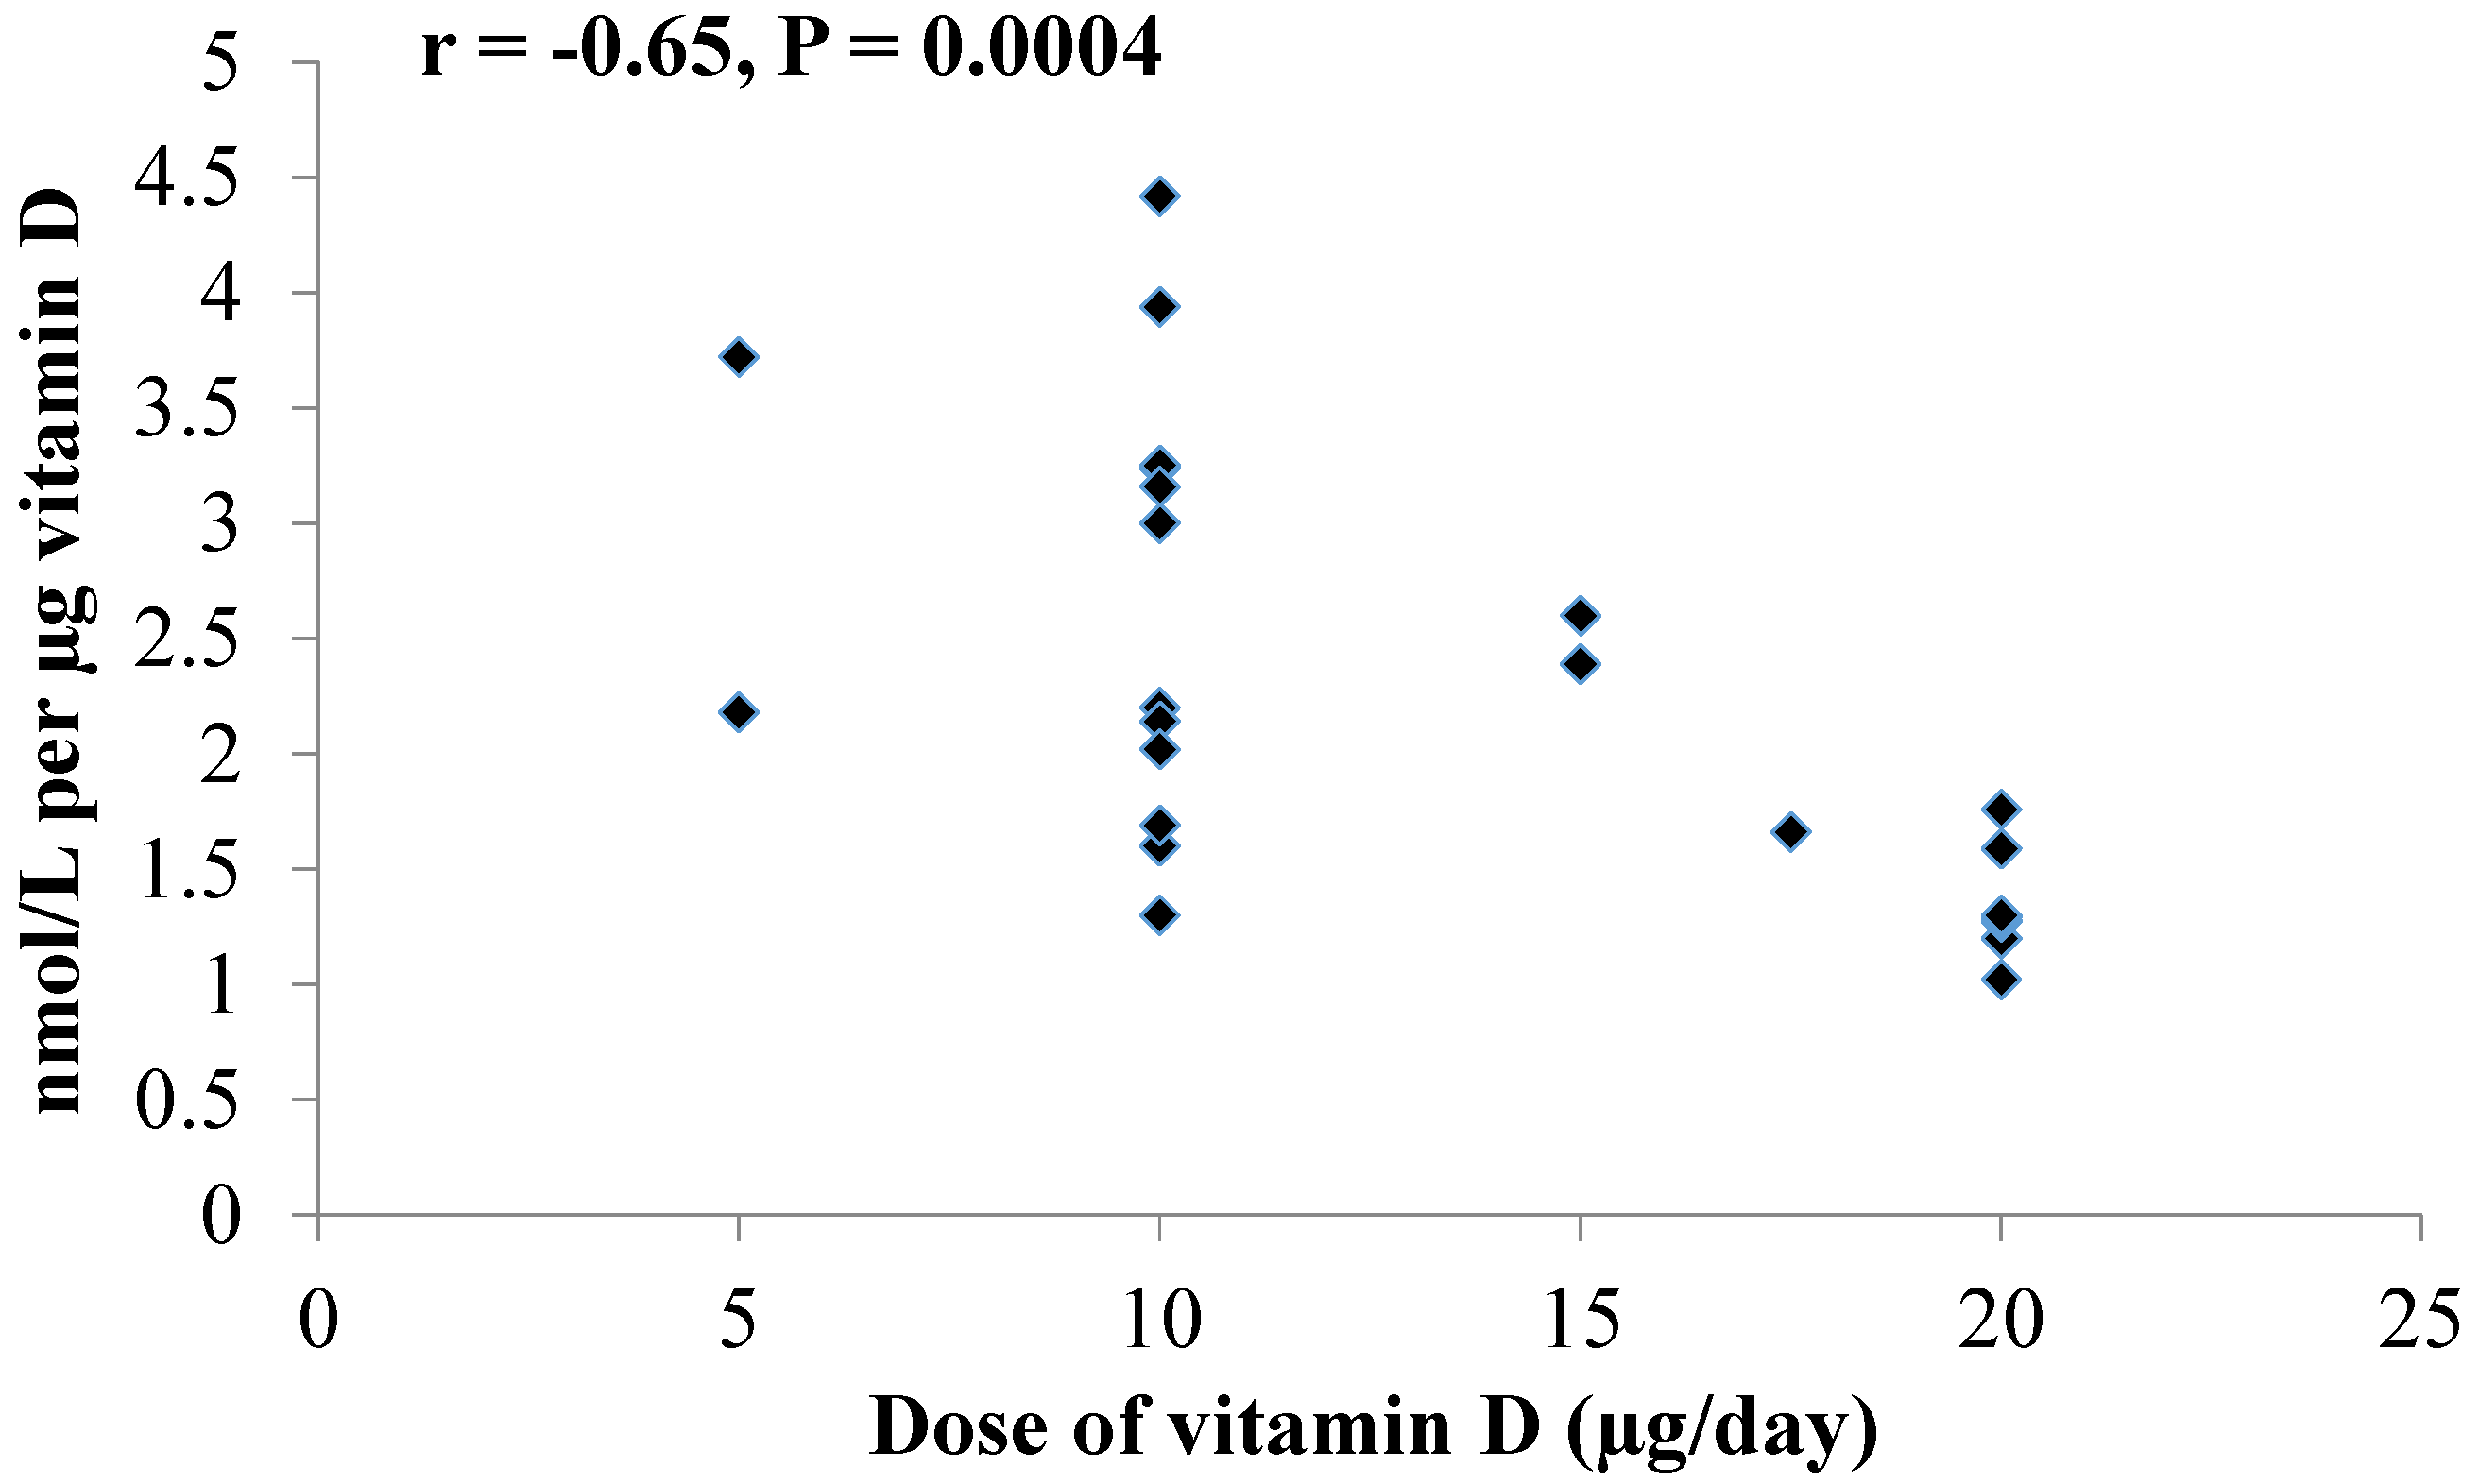 Nutrients | Free Full-Text | Moderate Amounts of Vitamin D3 in Supplements  are Effective in Raising Serum 25-Hydroxyvitamin D from Low Baseline Levels  in Adults: A Systematic Review